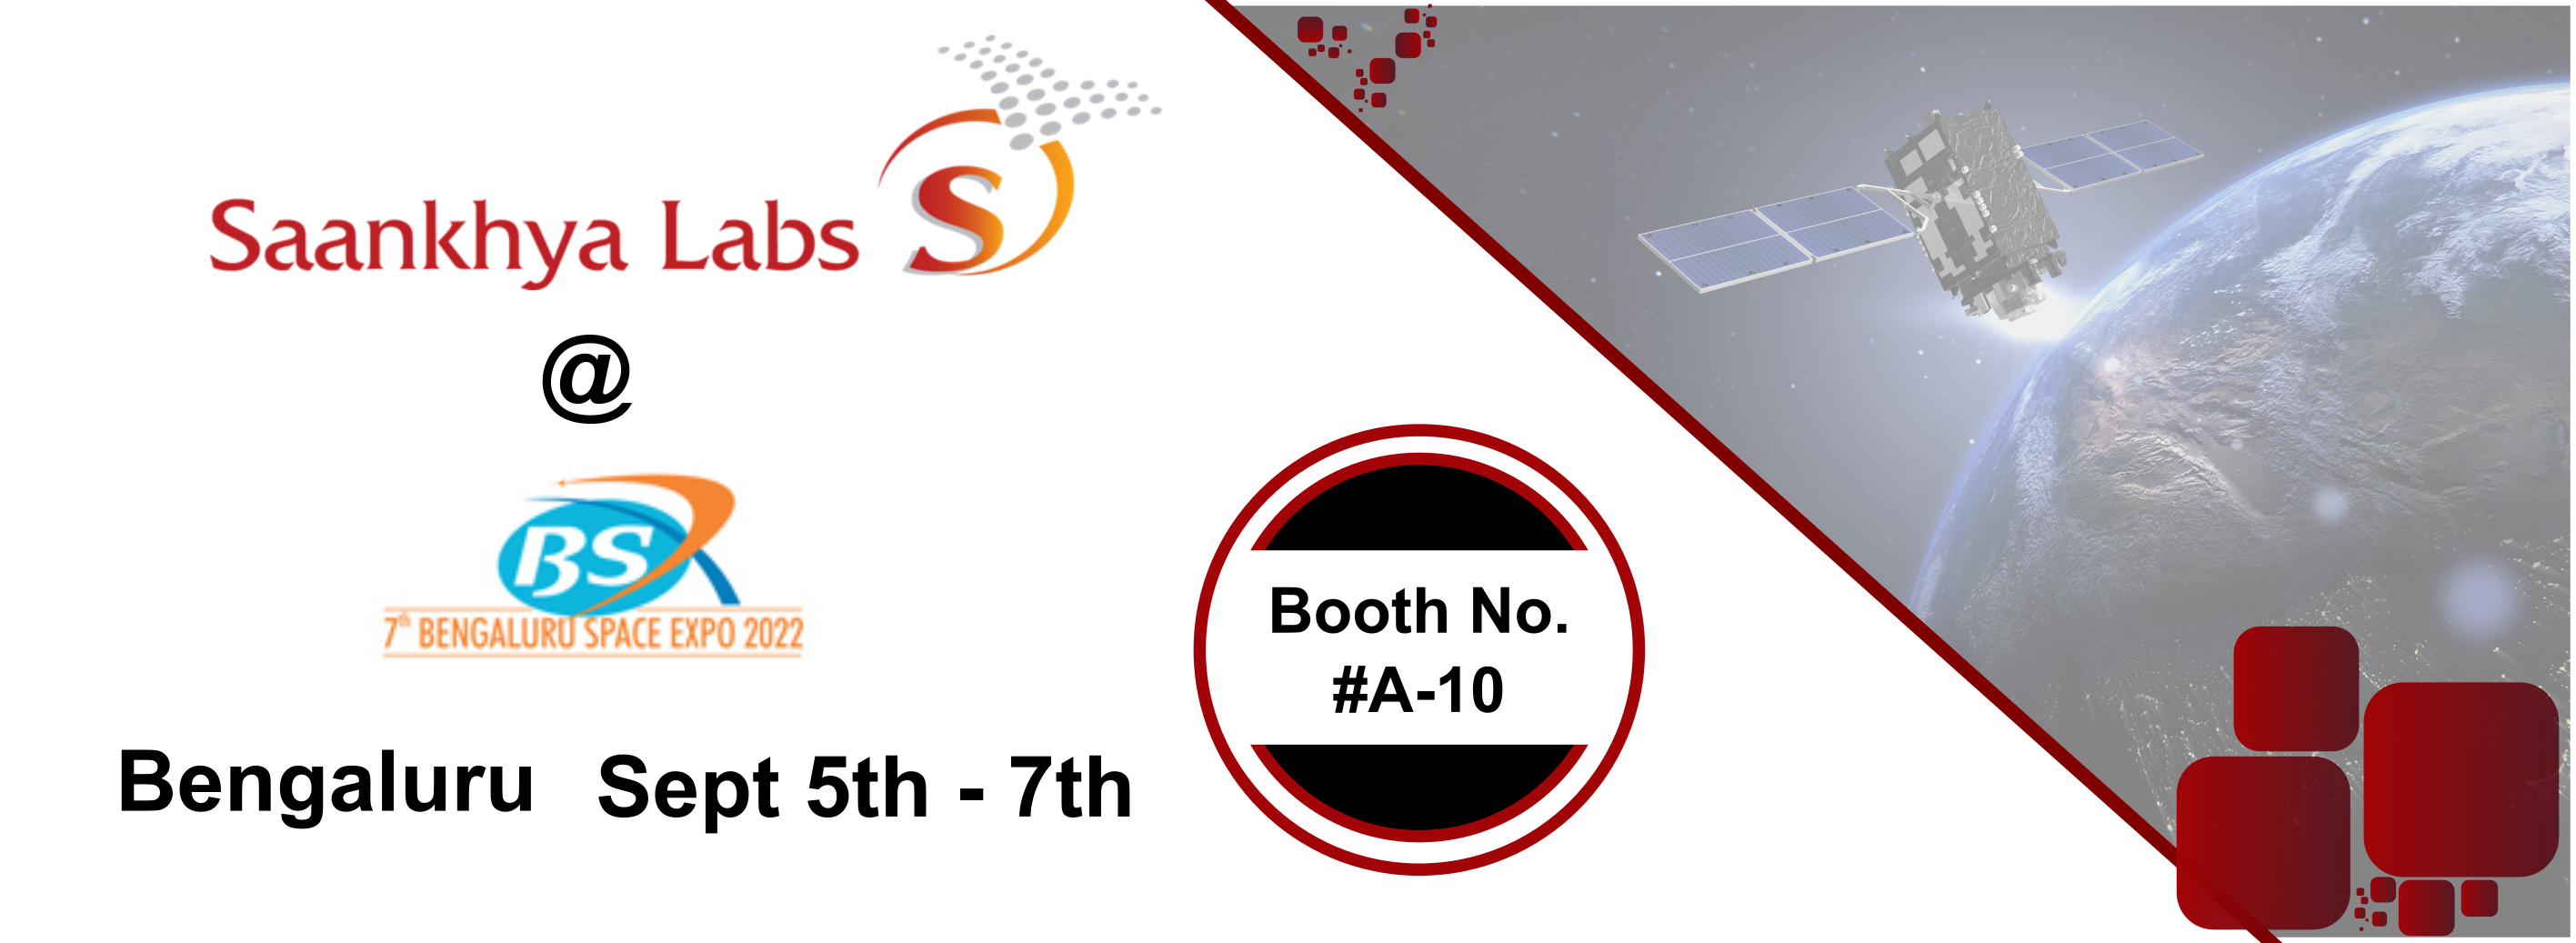 Saankhyalabs CommunicAsia 2022 Booth No 4G1 - 11